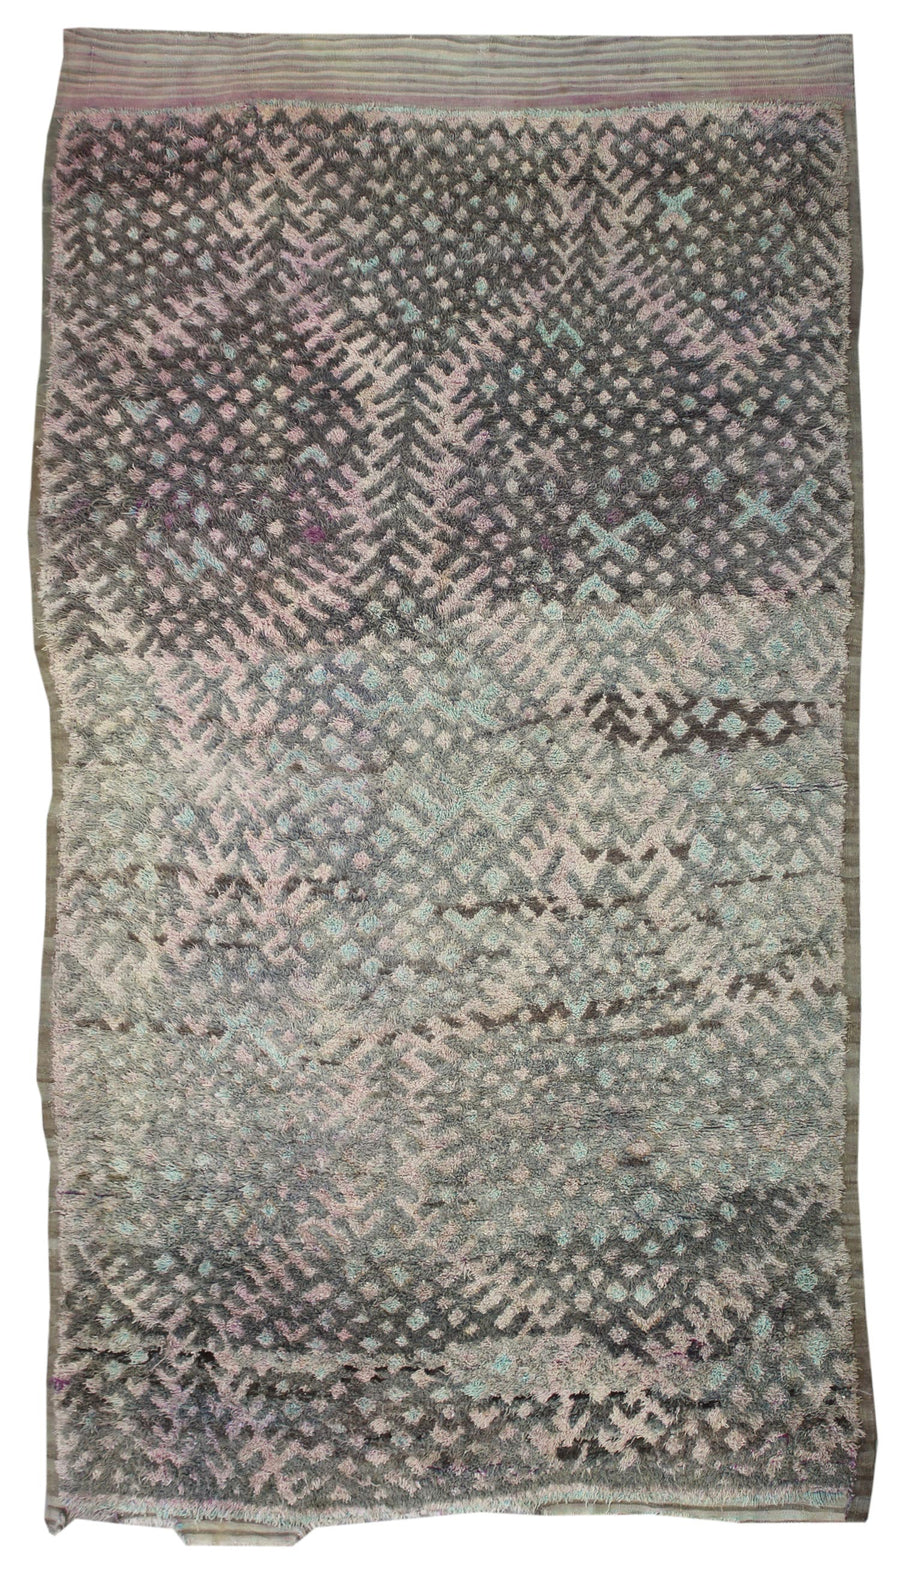 MOROCCAN HANDKNOTTED RUG, 61925